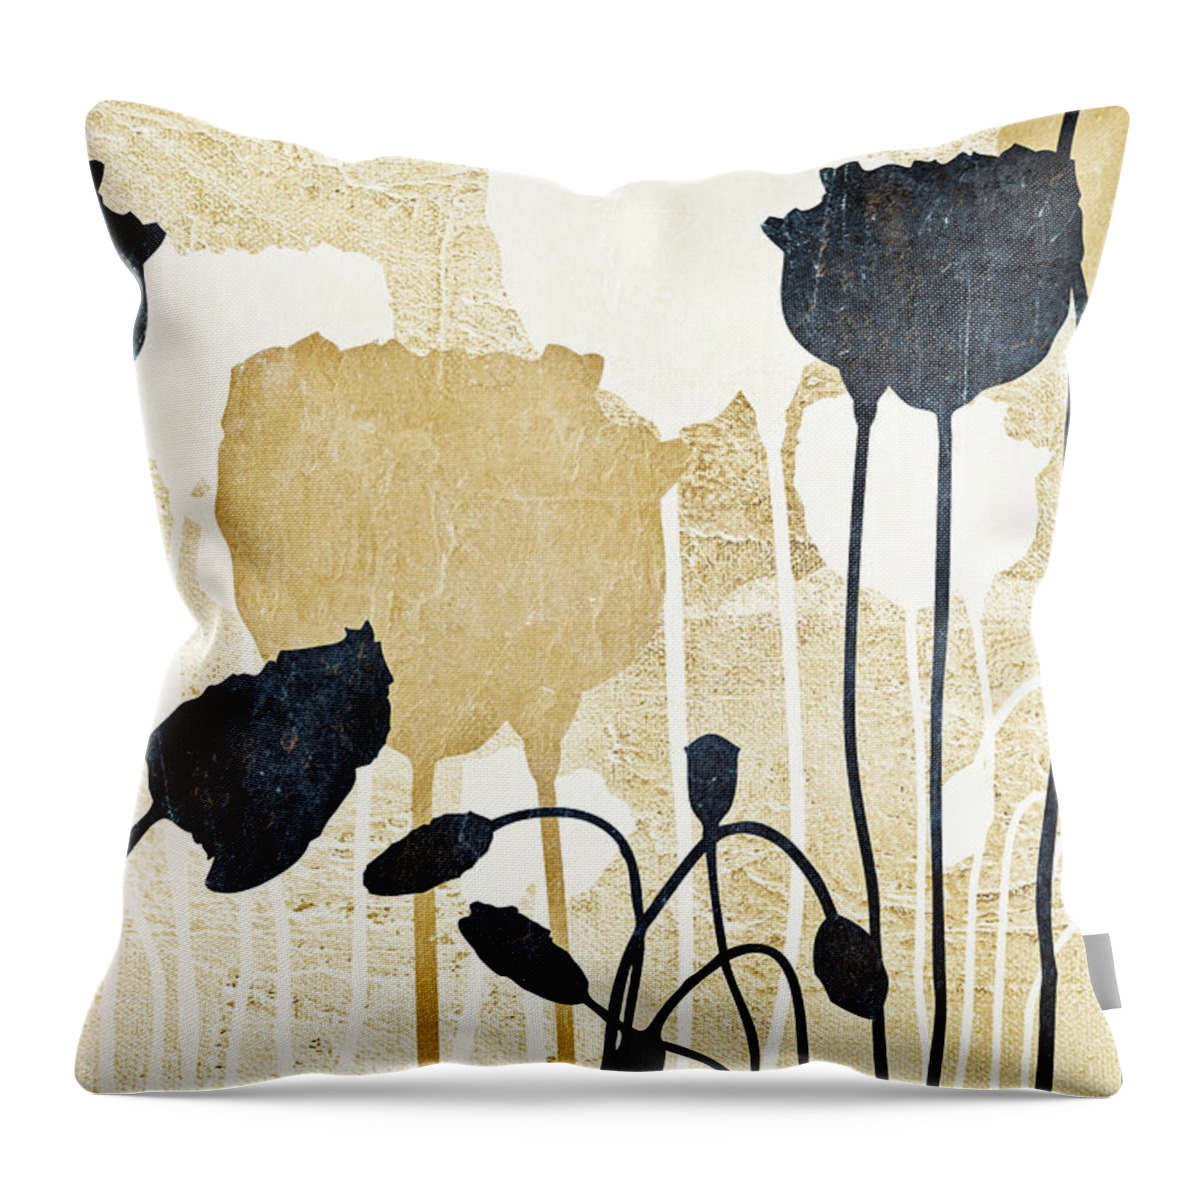 Floral Throw Pillow featuring the mixed media Floral Simplicity Garden by Patricia Pinto